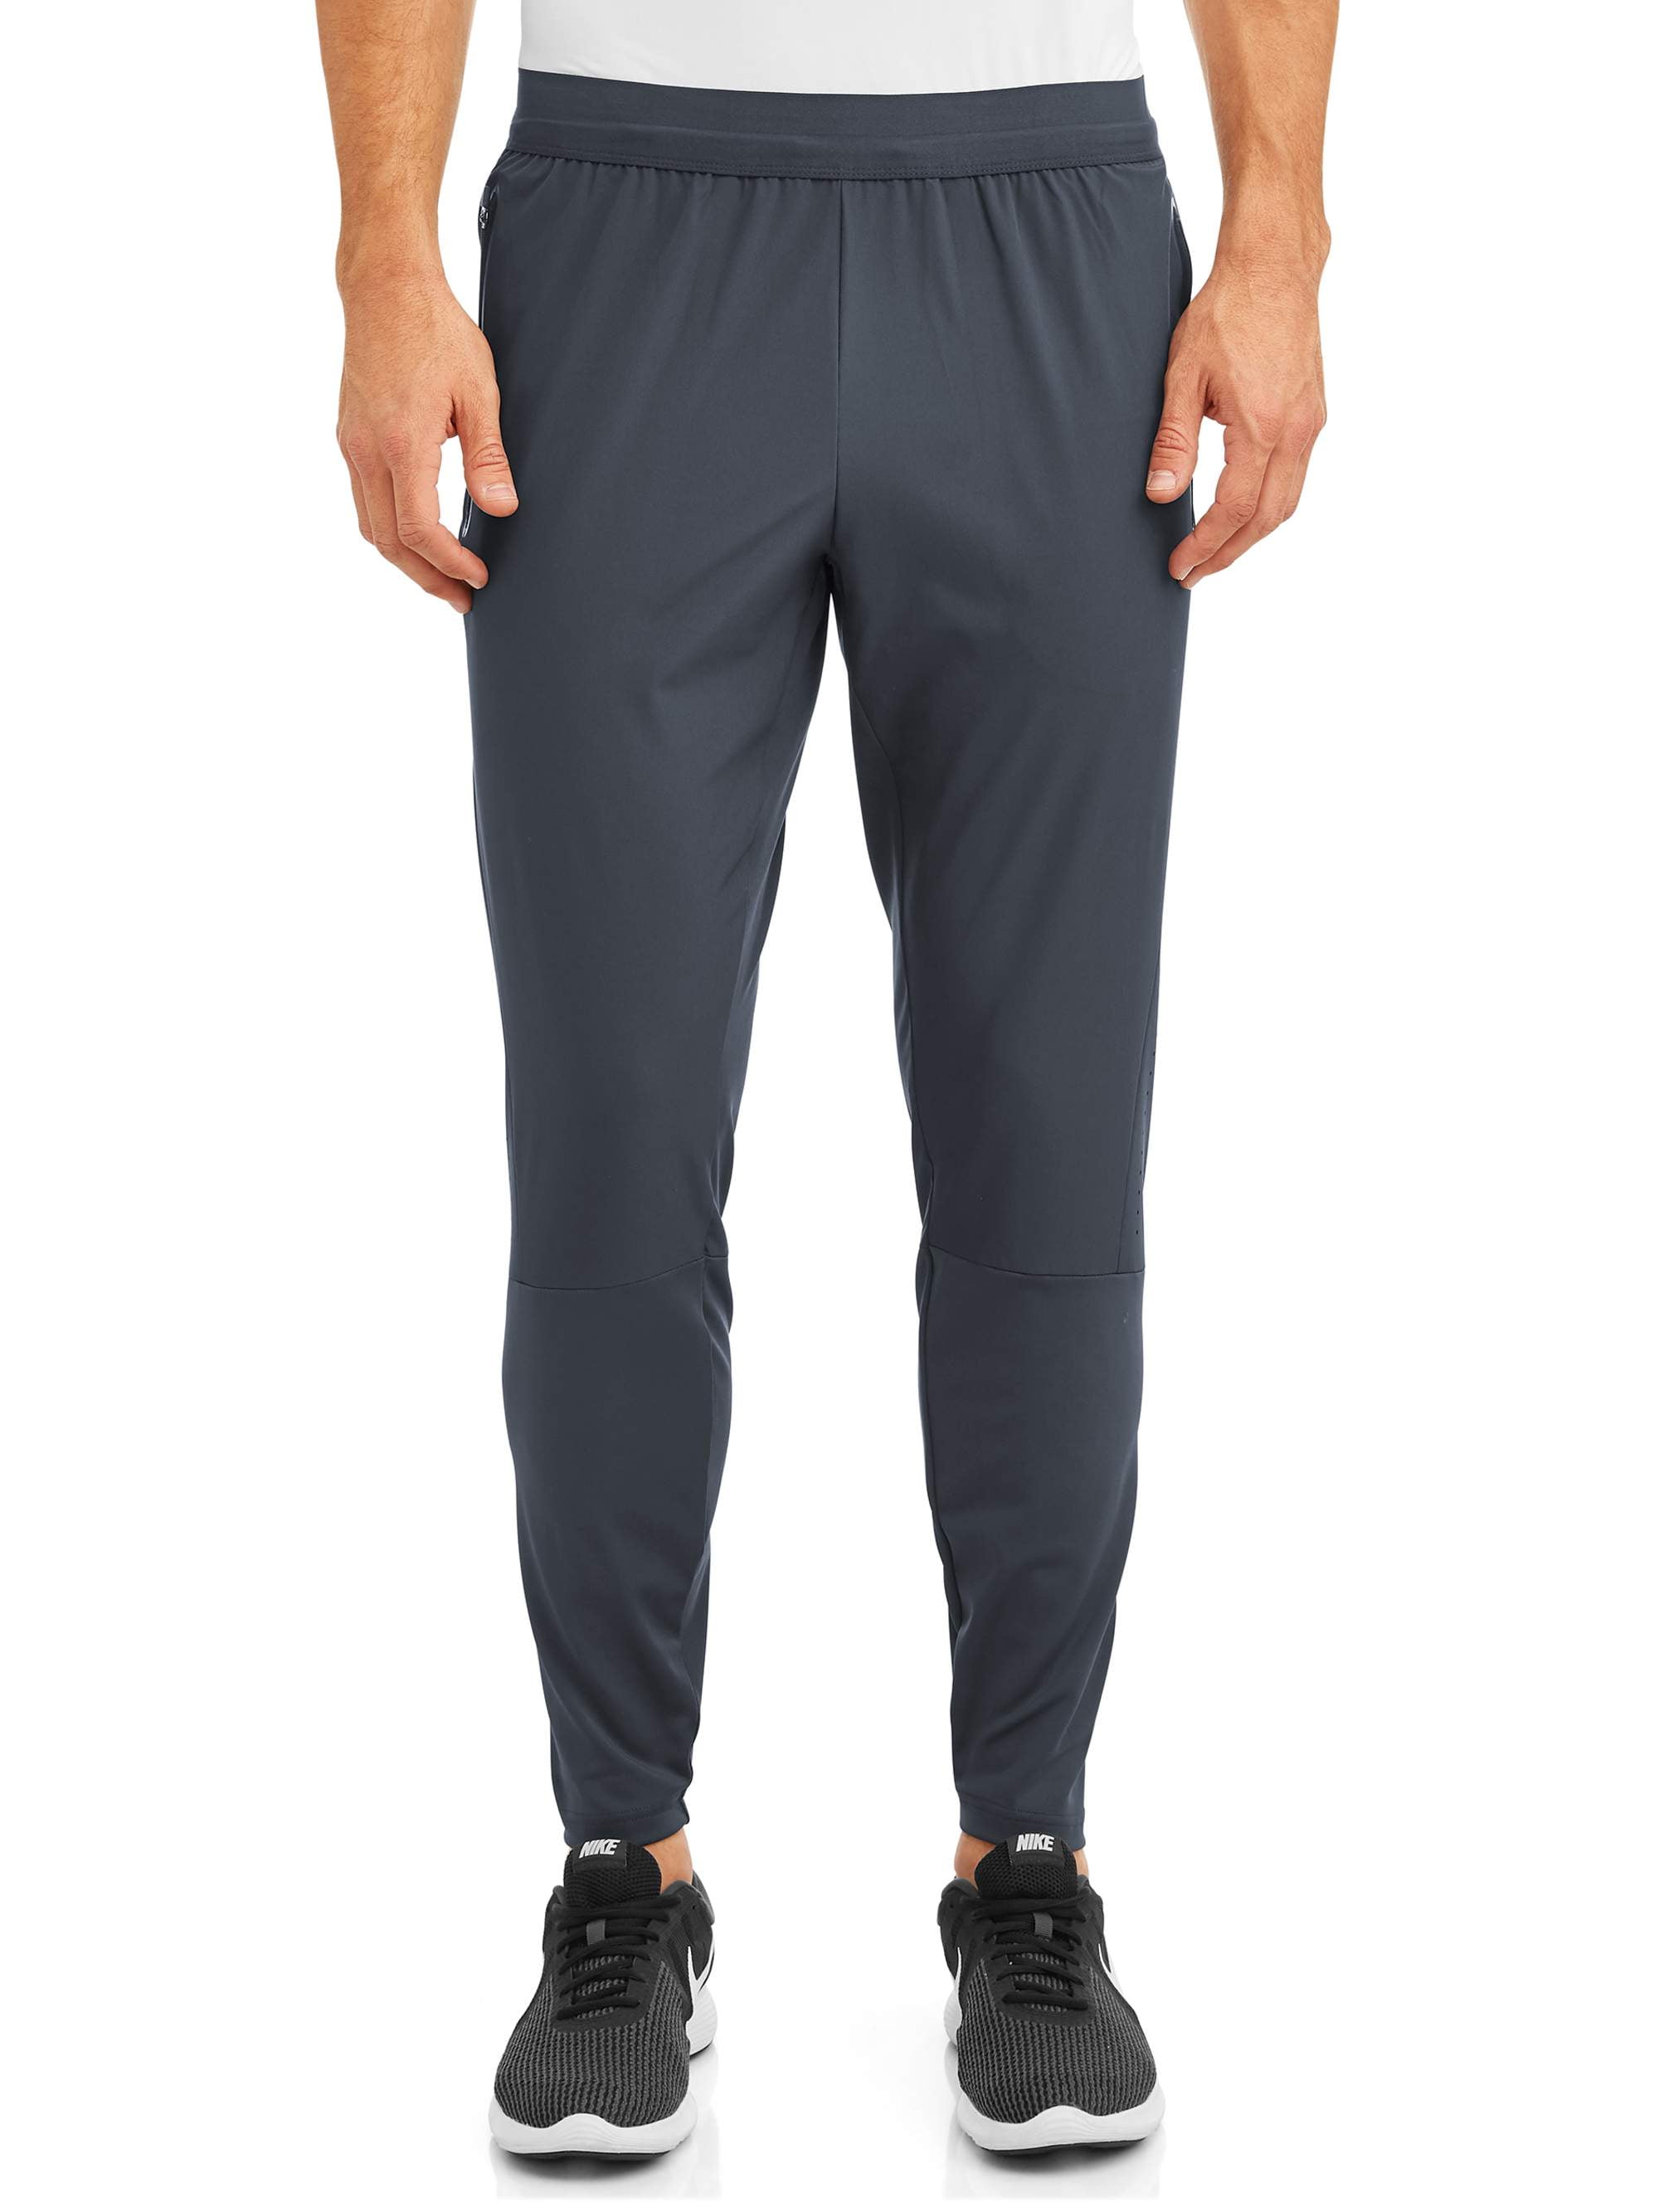 Russell Men's And Big Men's Hybrid Running Pant, Up To 5XL | lupon.gov.ph